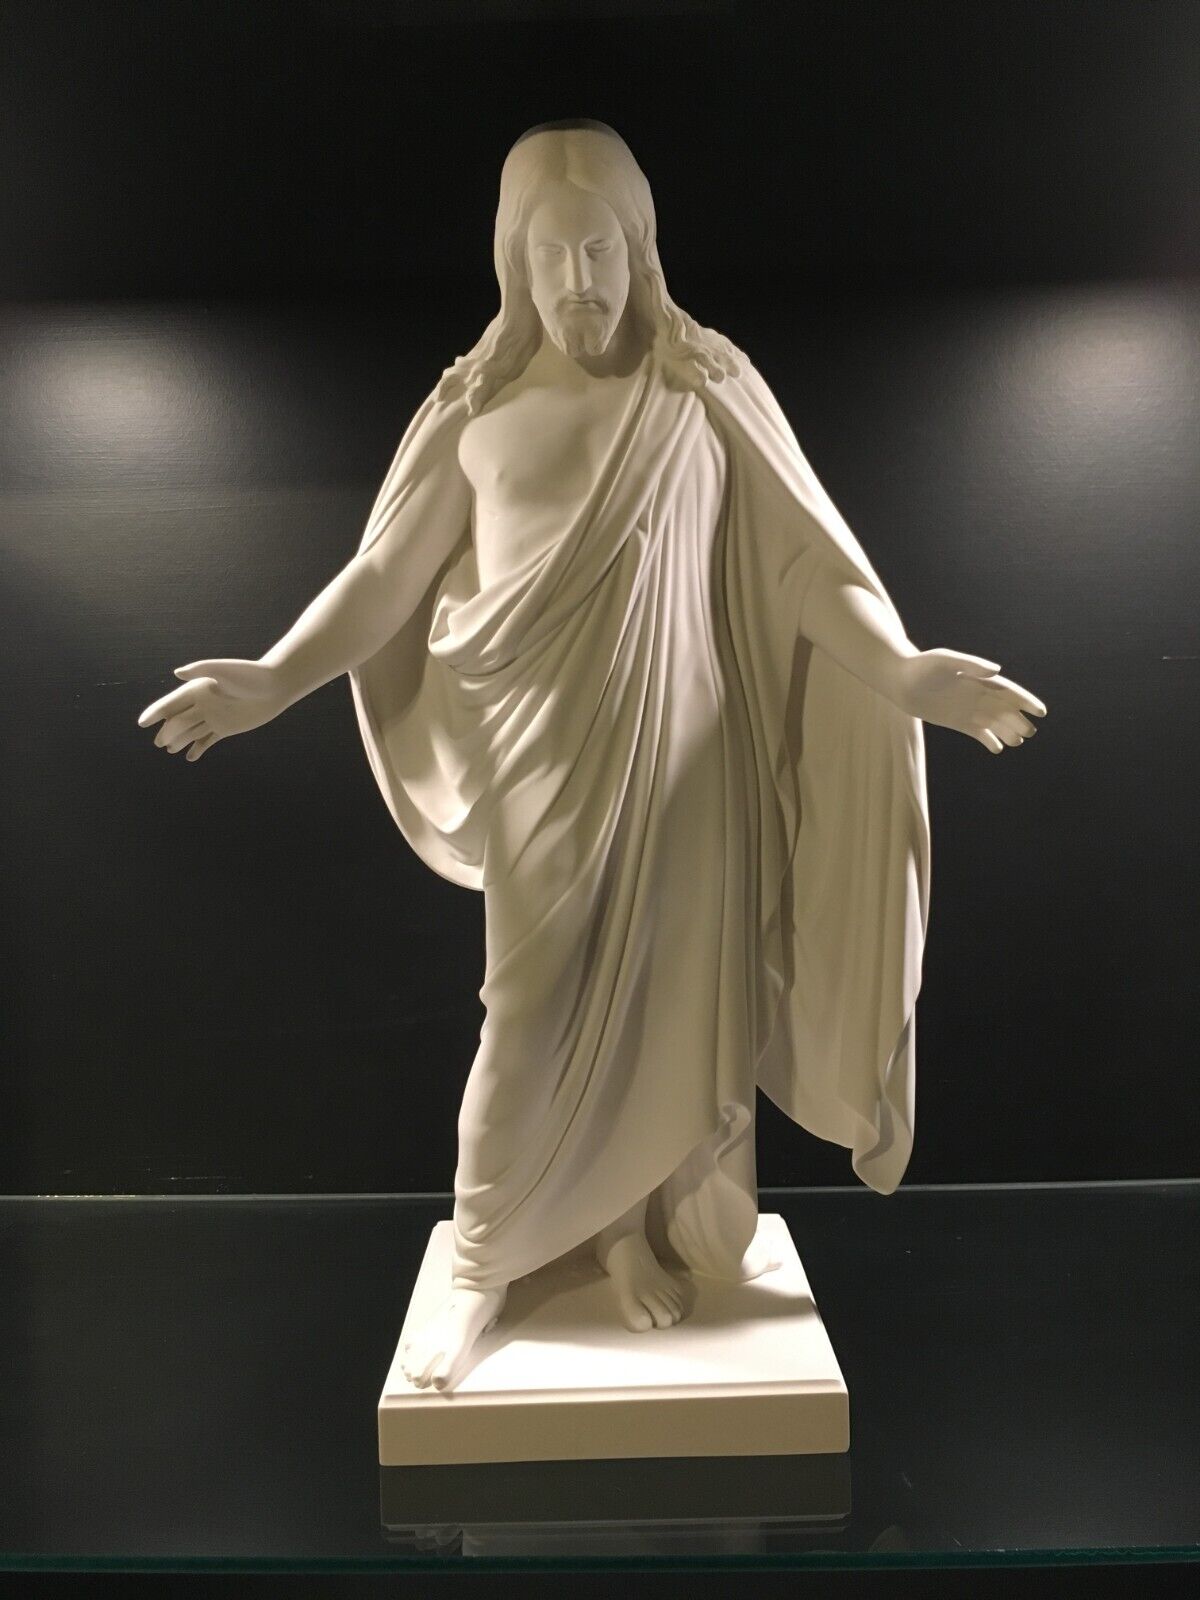 Large Elegant Depiction of Christ with Open Arms in Full Figure Statue 